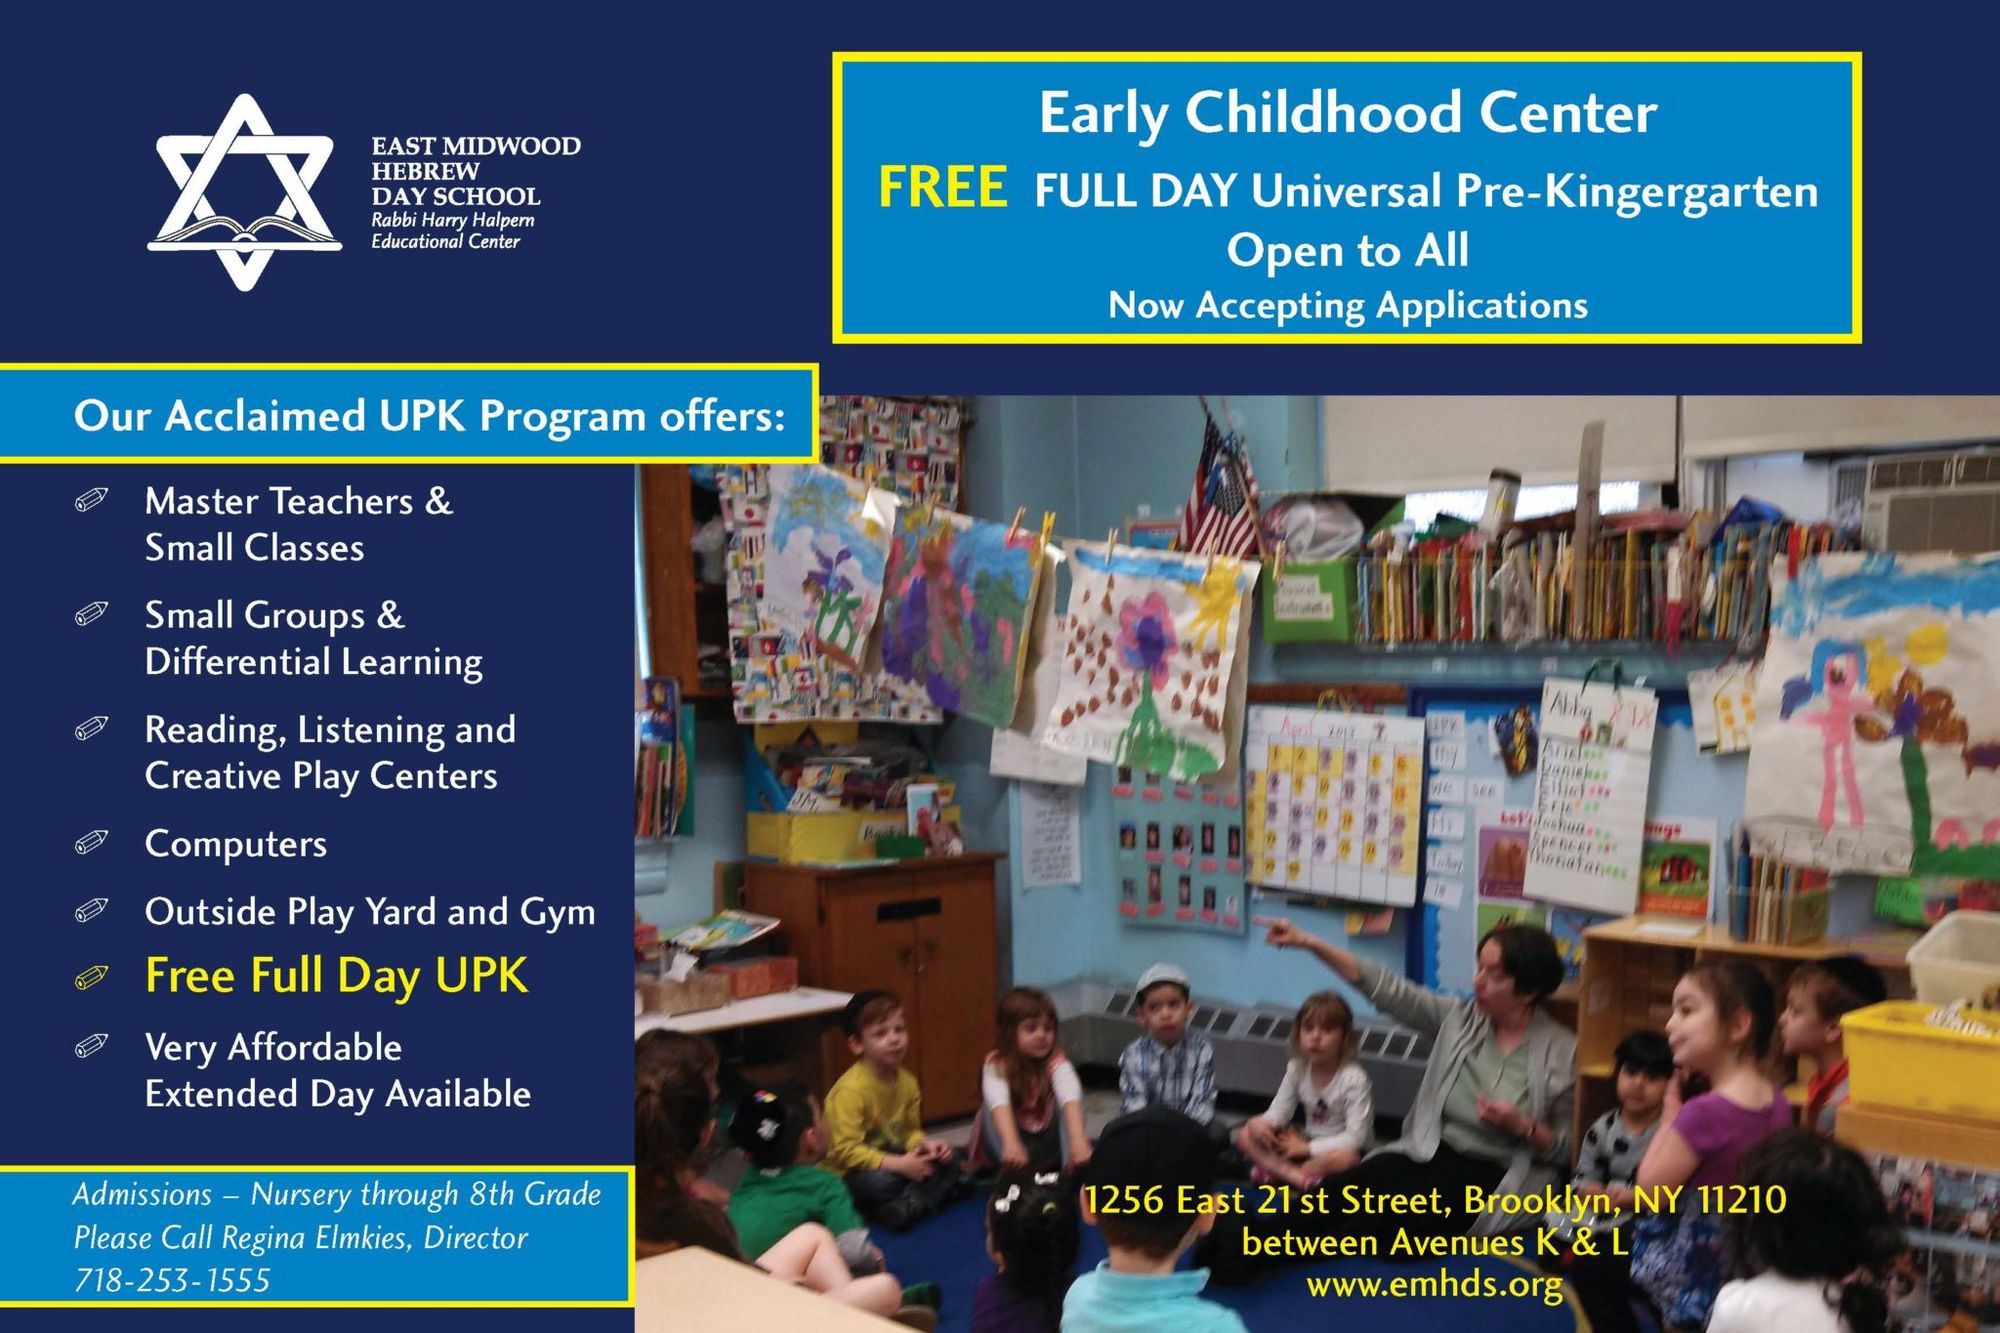 East Midwood Hebrew Day School Now Accepting Applications For Their Universal Pre-K Program (Partner)